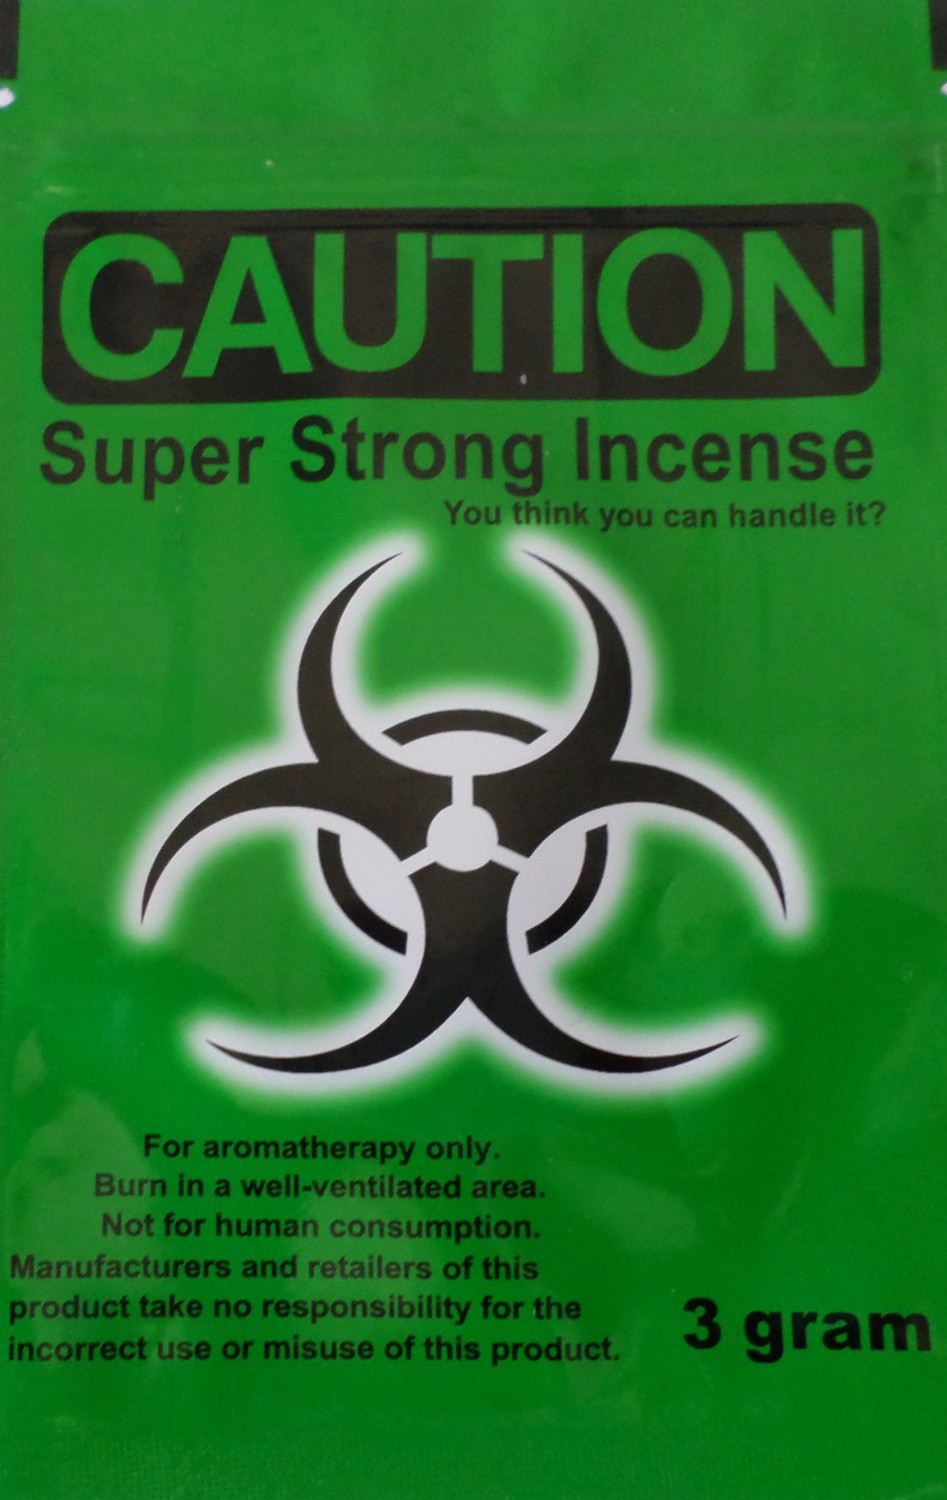 Caution green label 6x pack